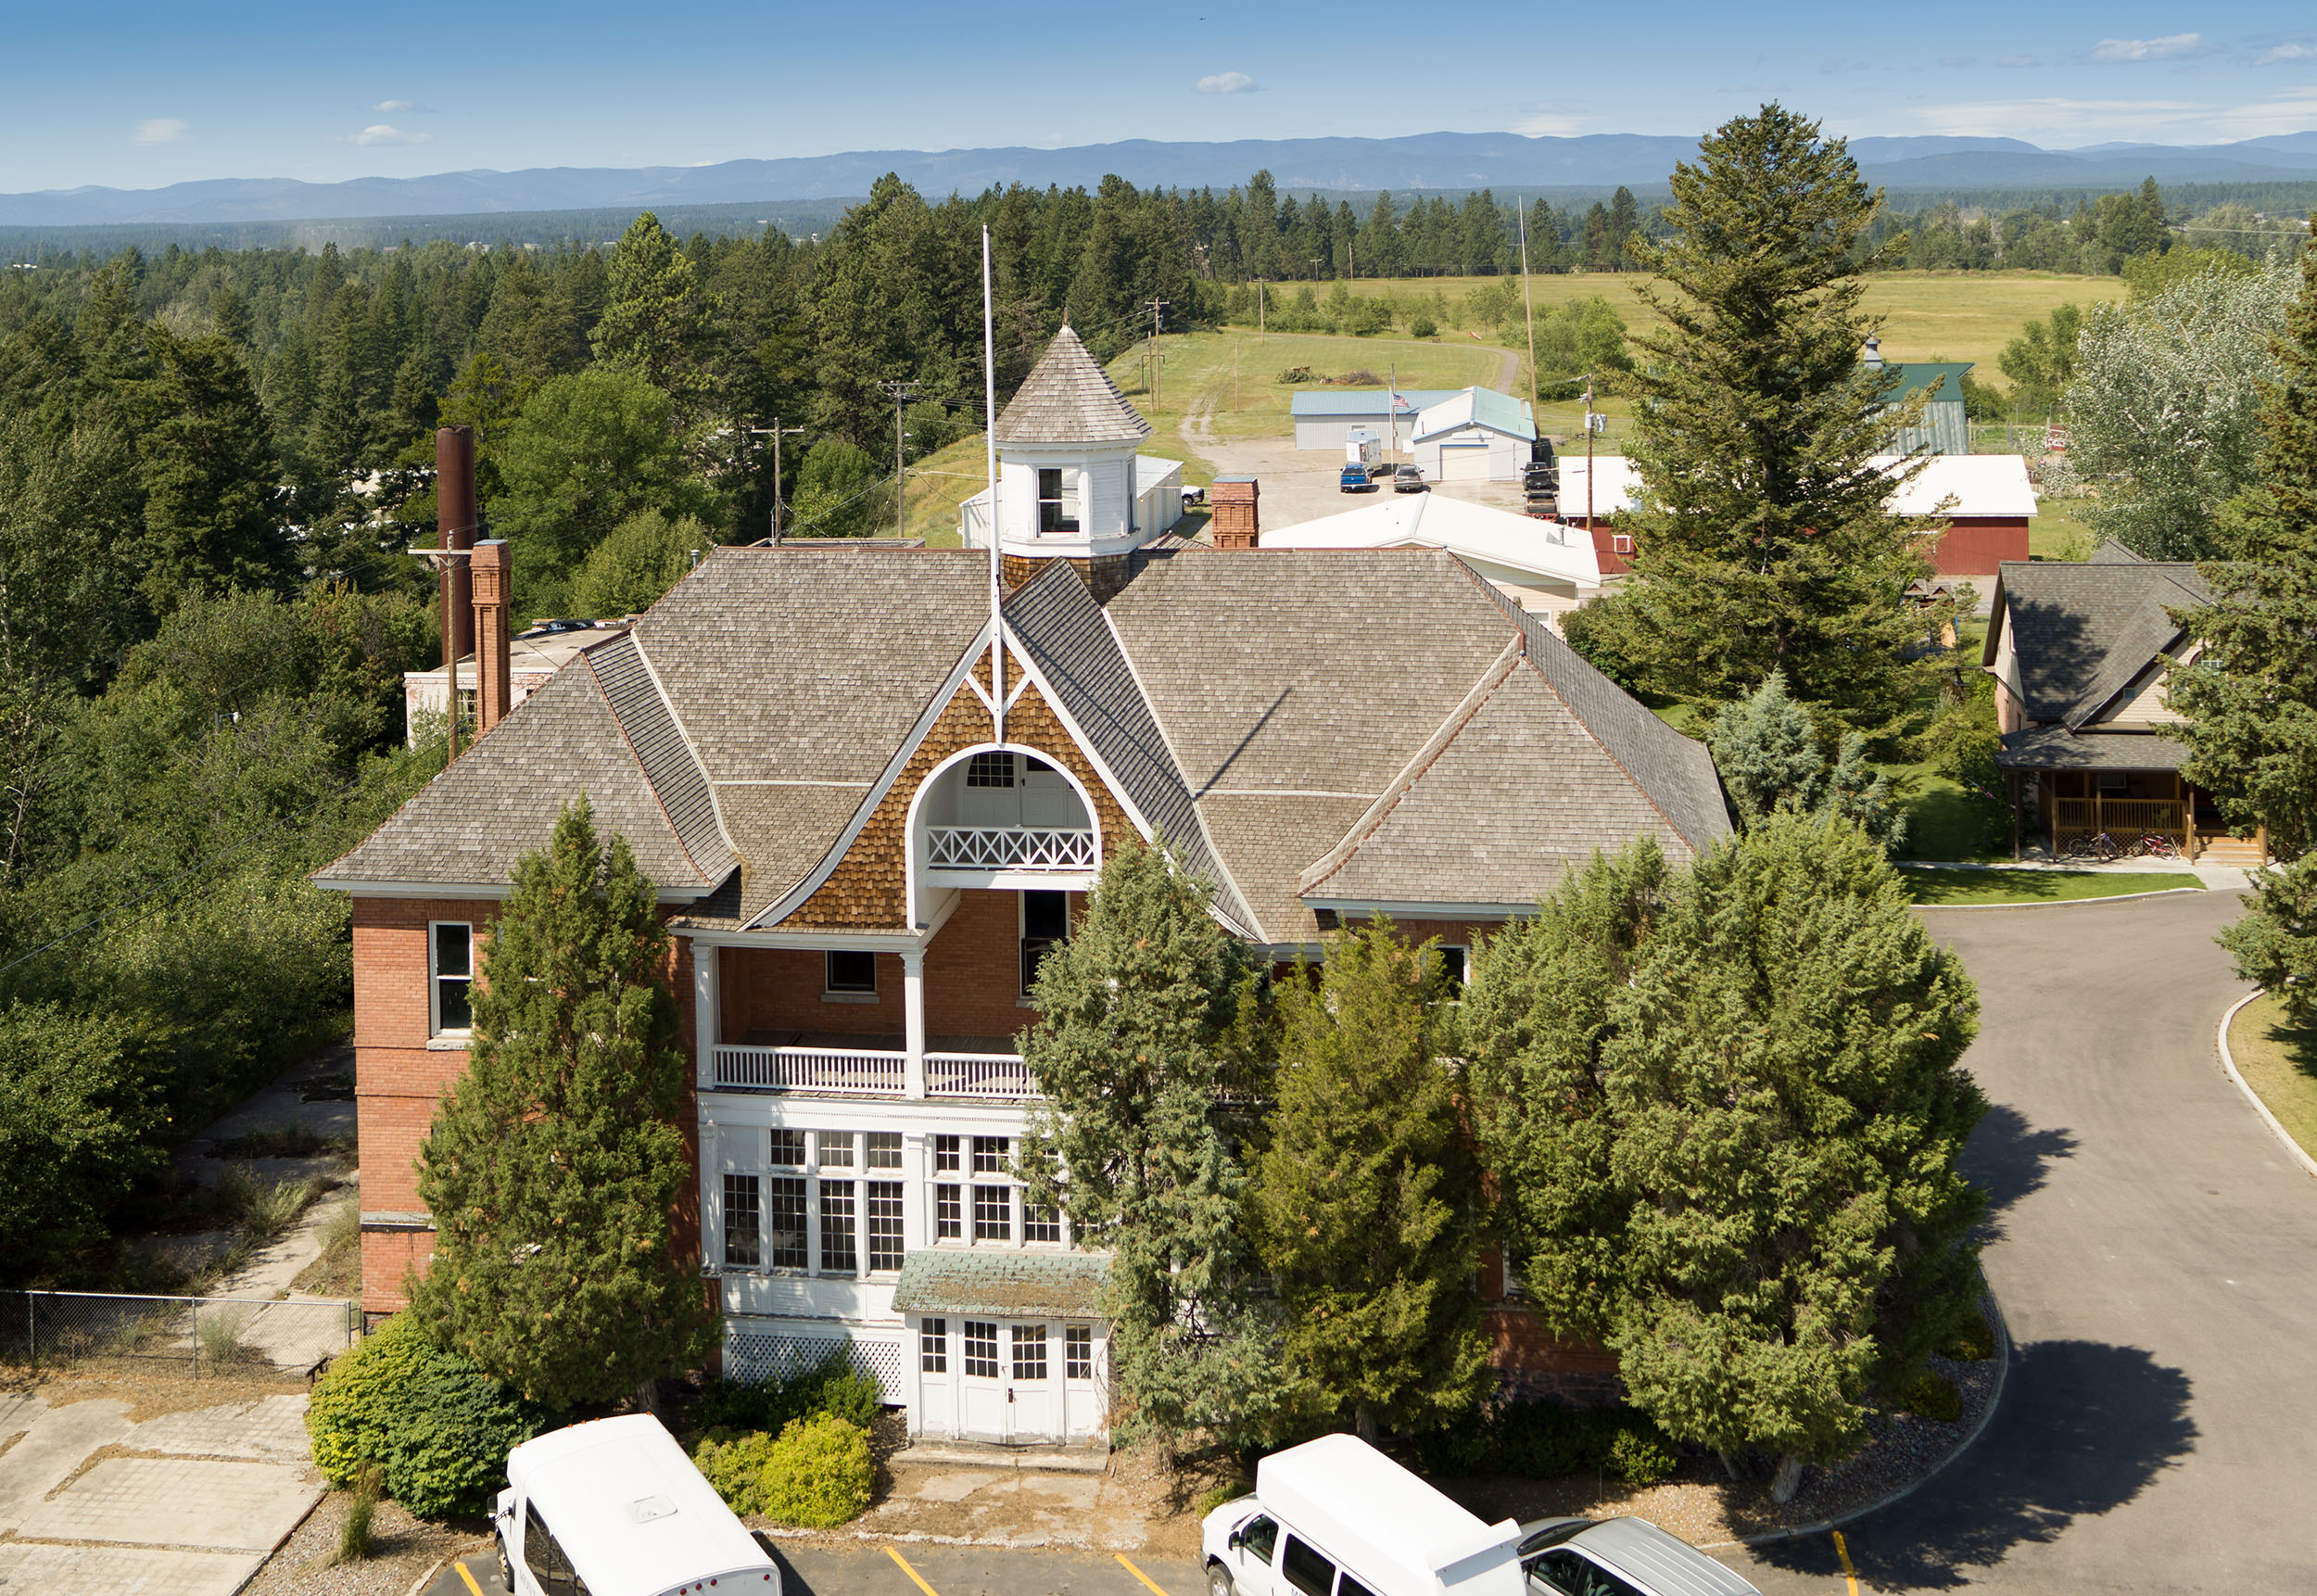 An aerial view of the main building of the Veterans Home. It is light brown brick with a slanted roof. There is a porch visible at the back of the home.